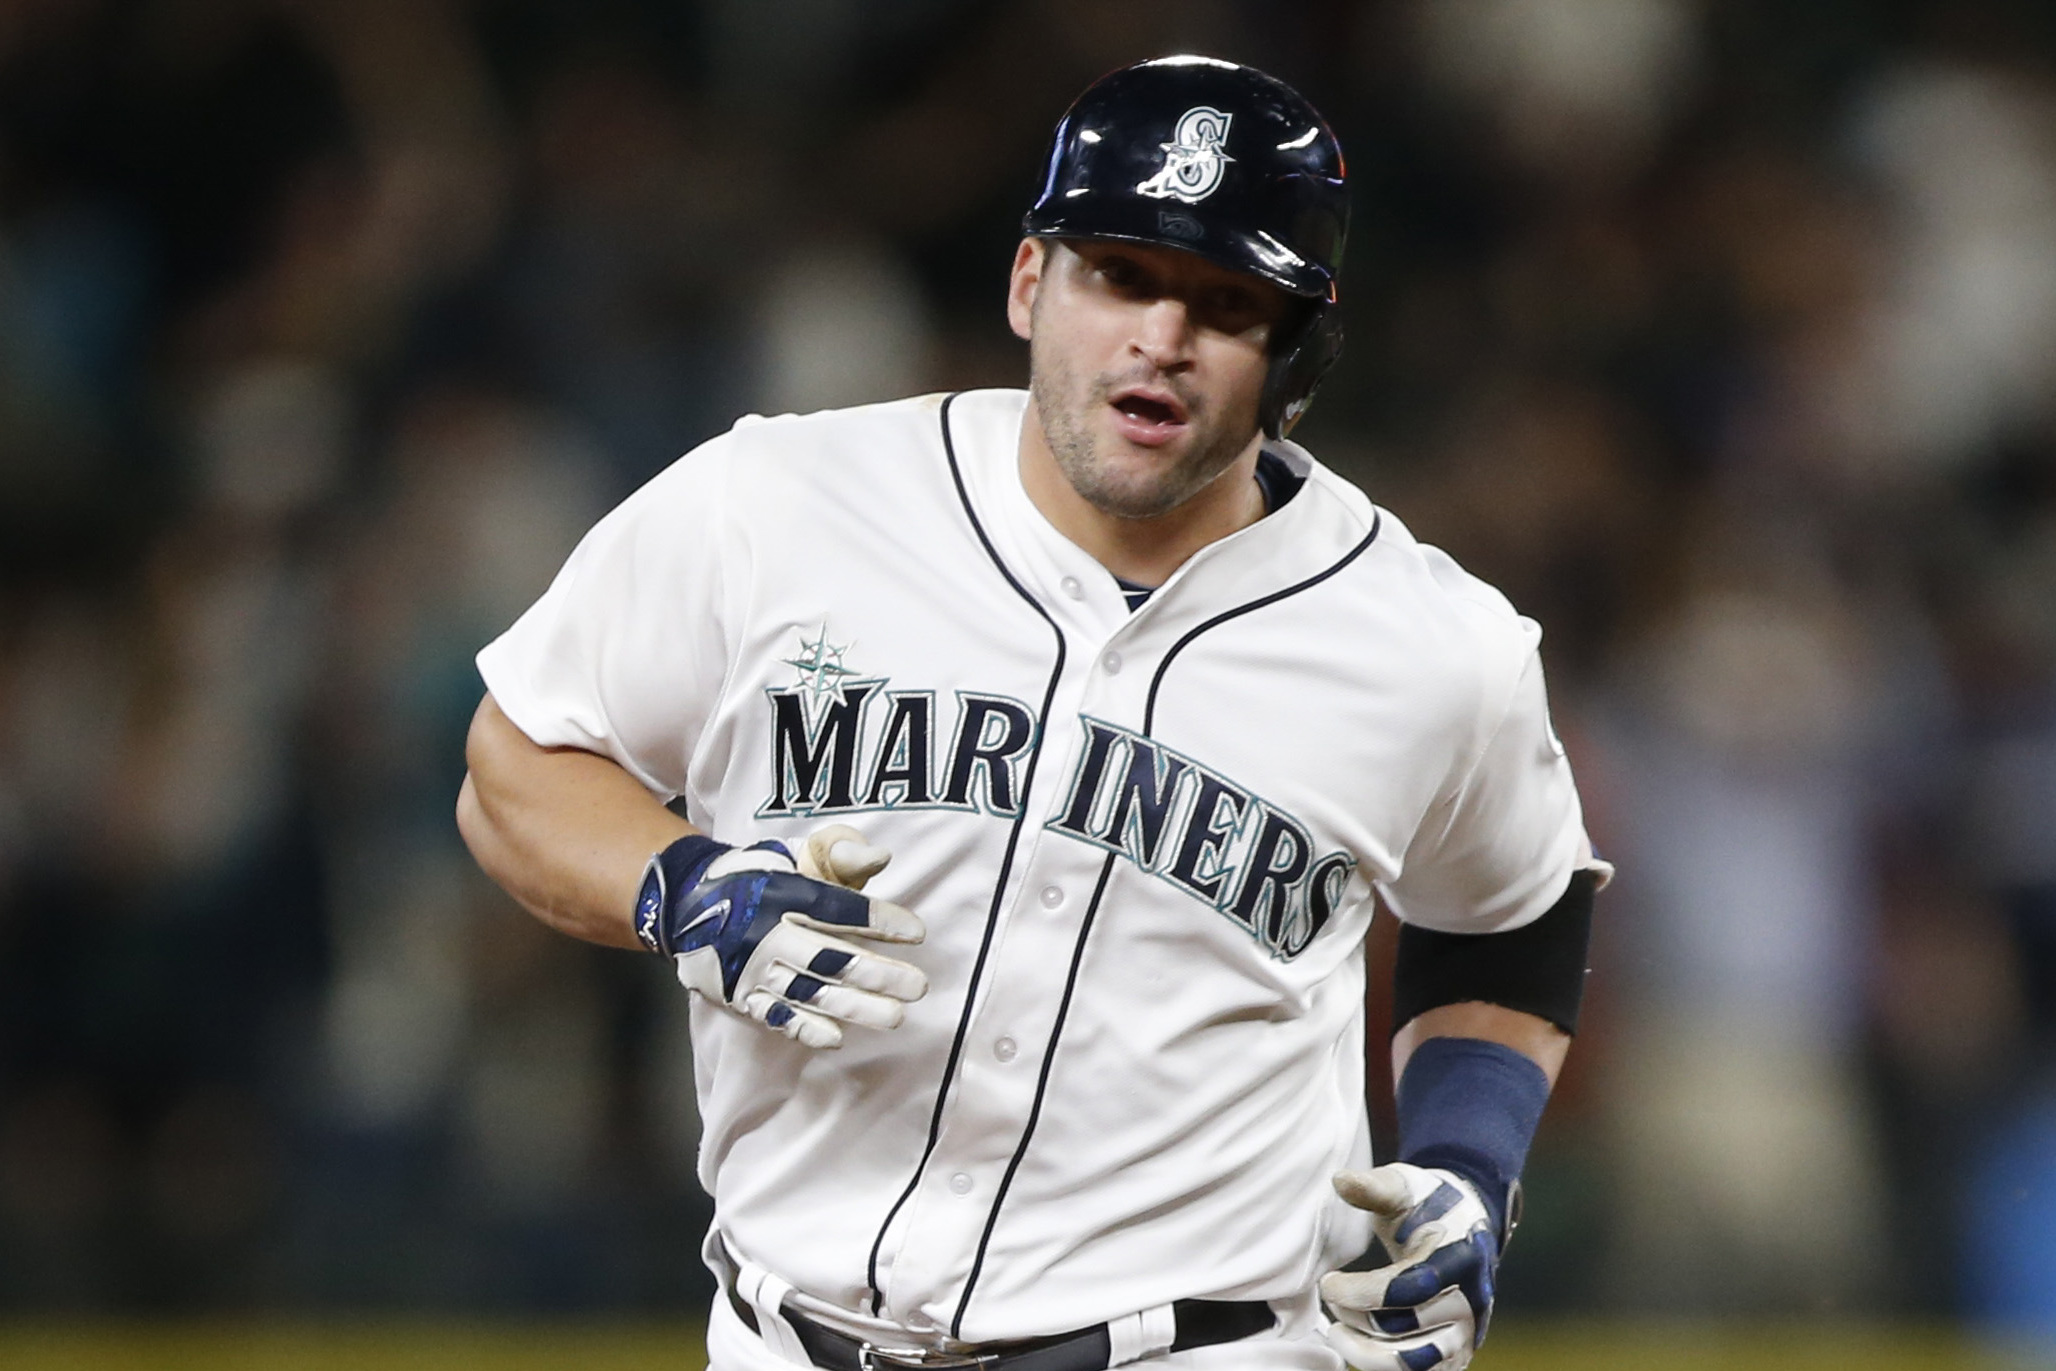 Mariners Activate C Mike Zunino from the DL